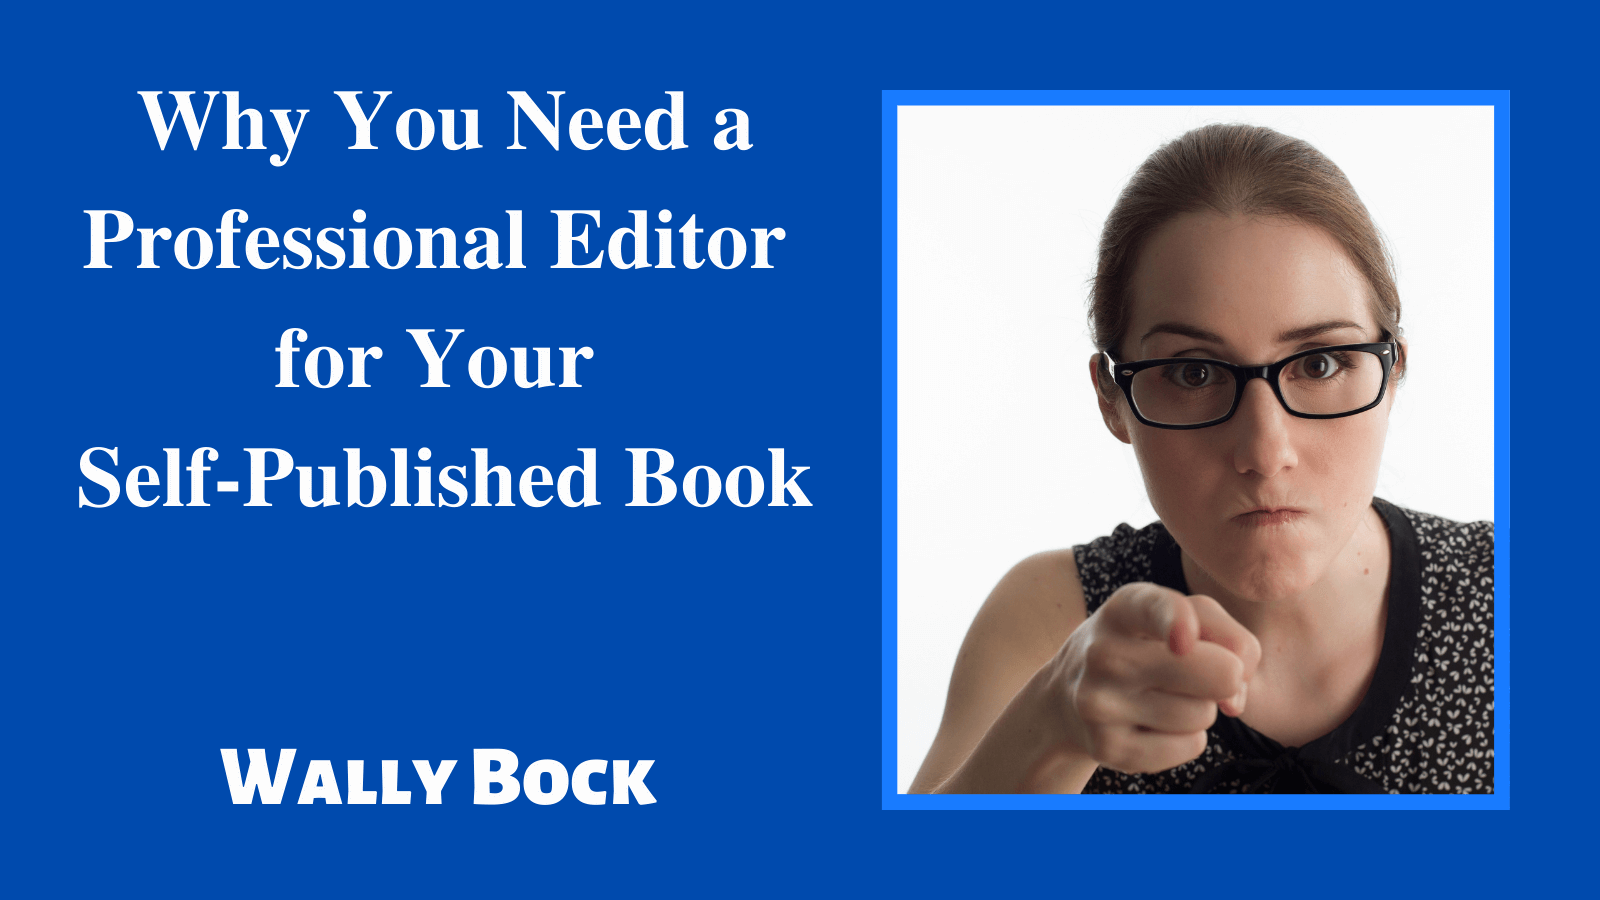 Why You Need a Professional Editor for Your Self-Published Book